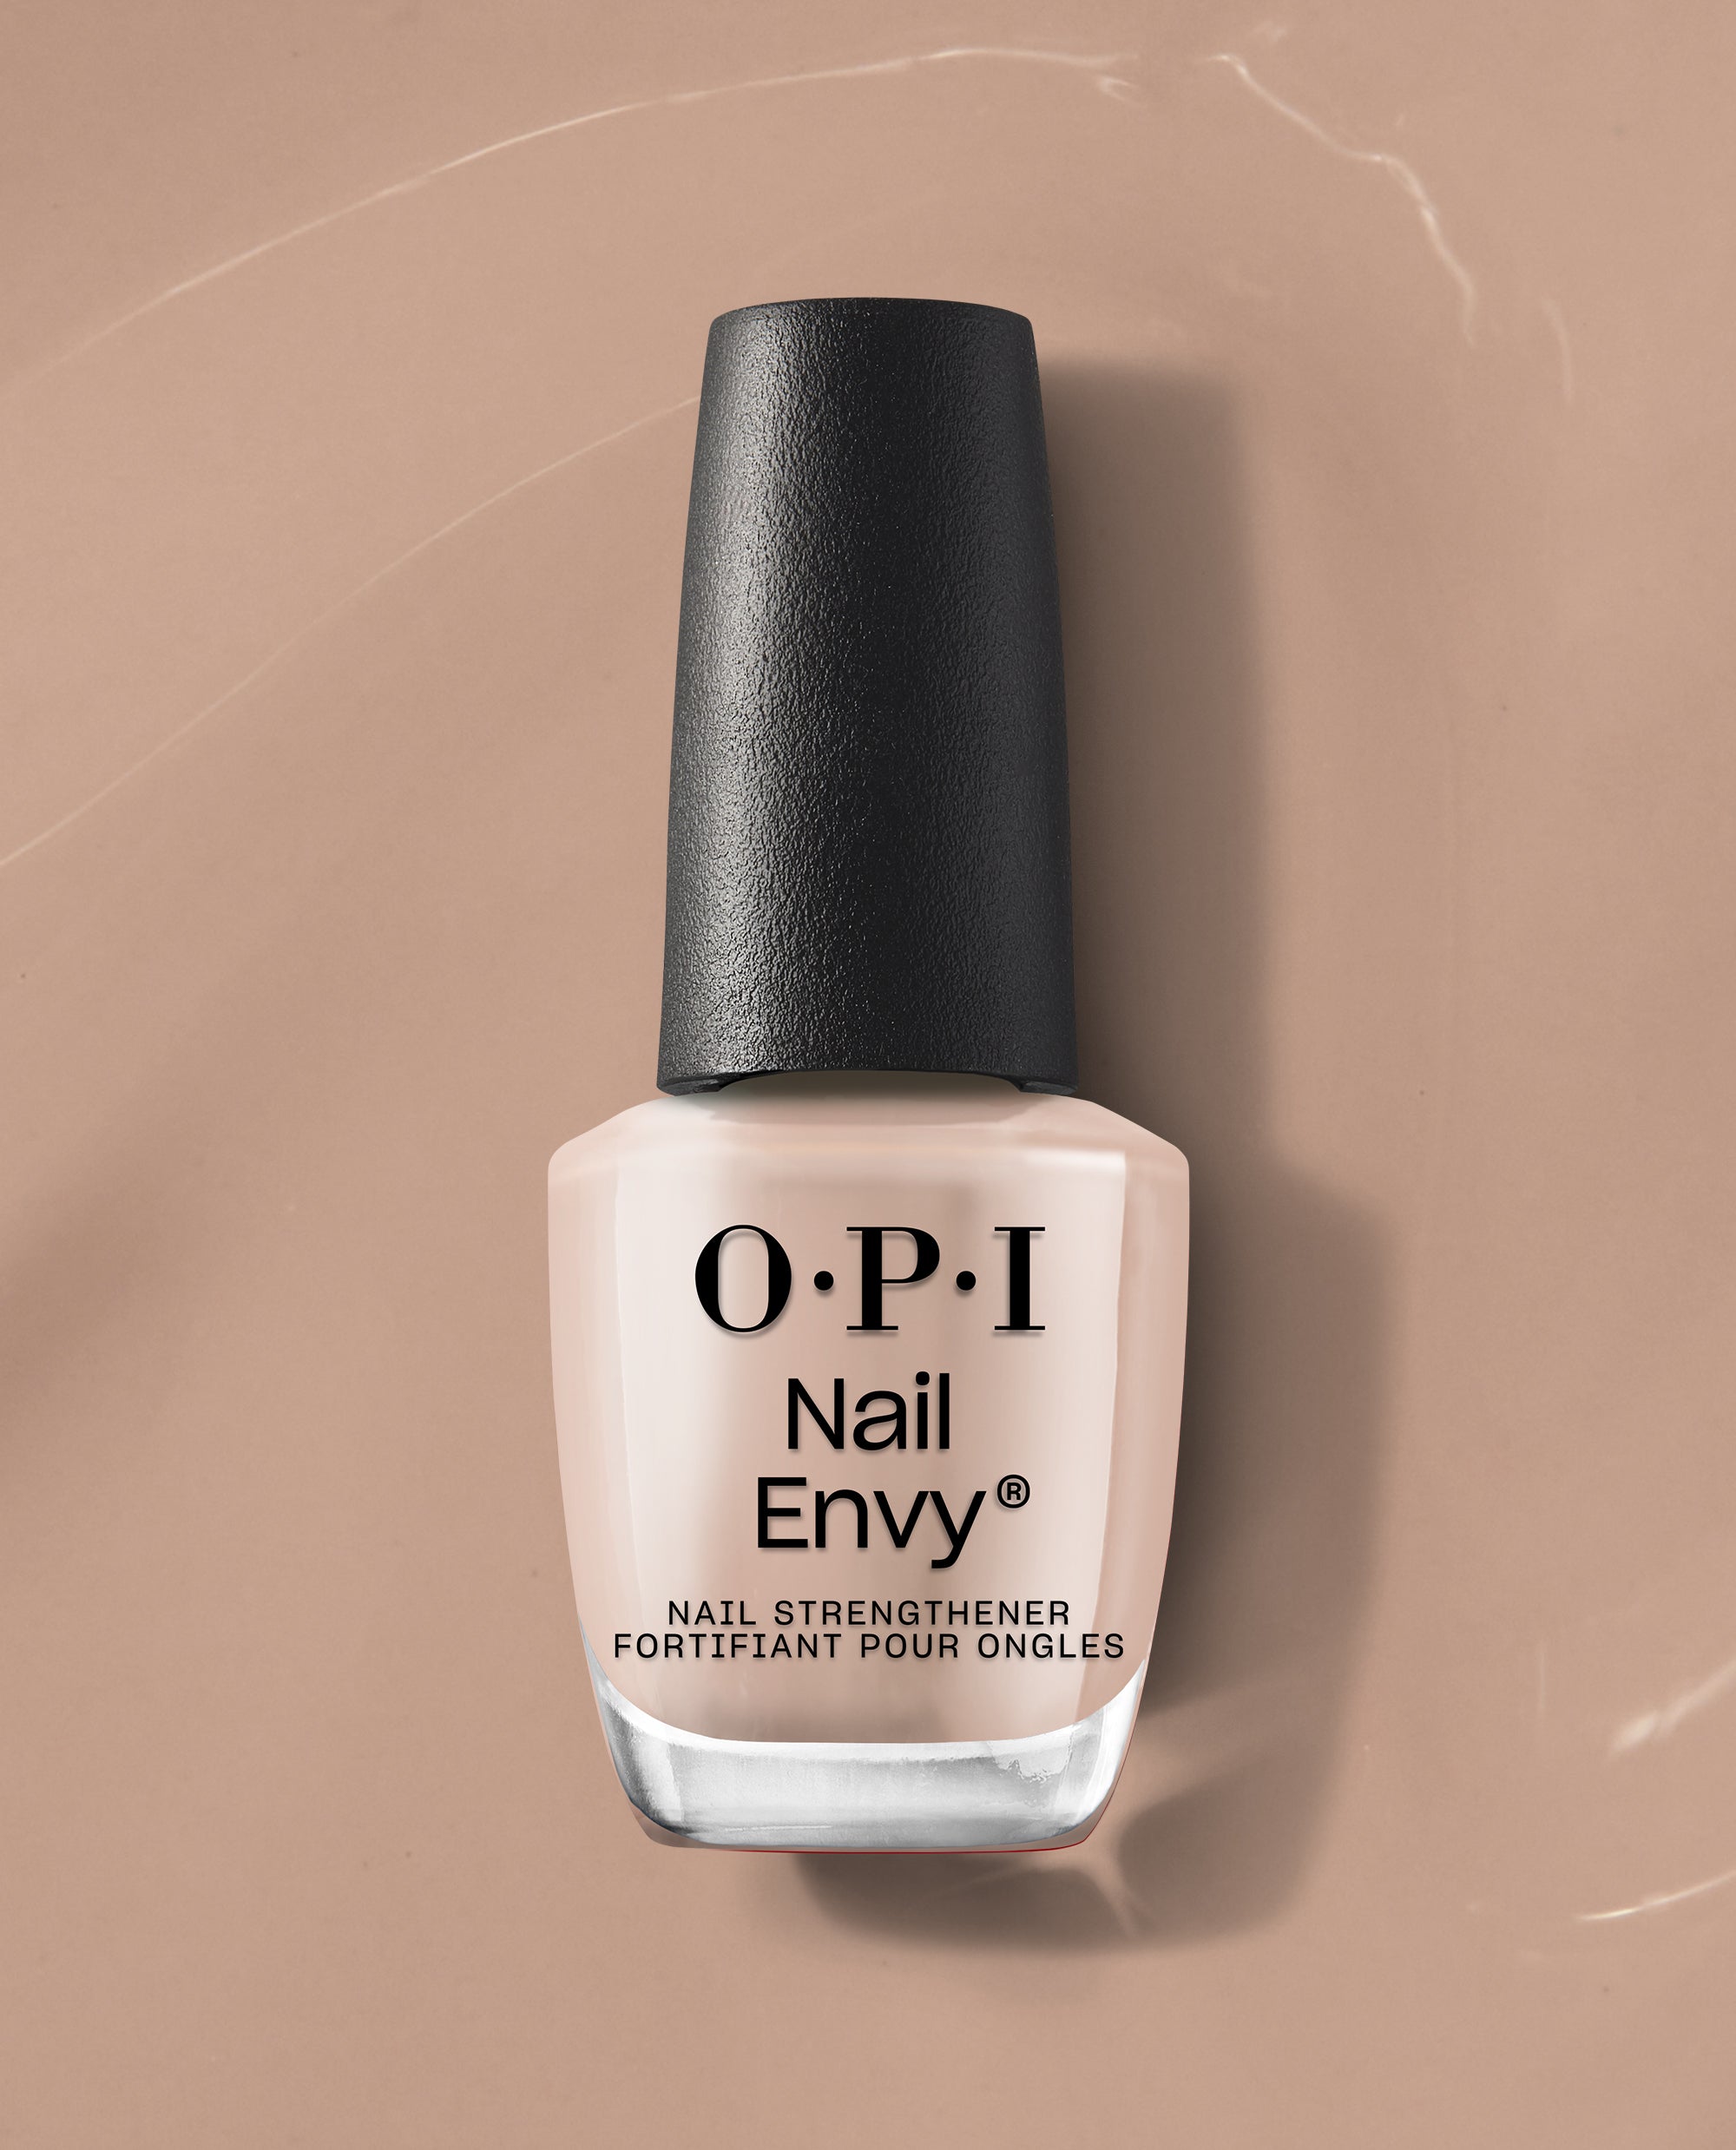 Nail Envy Double Nude-y Nail Strengthener